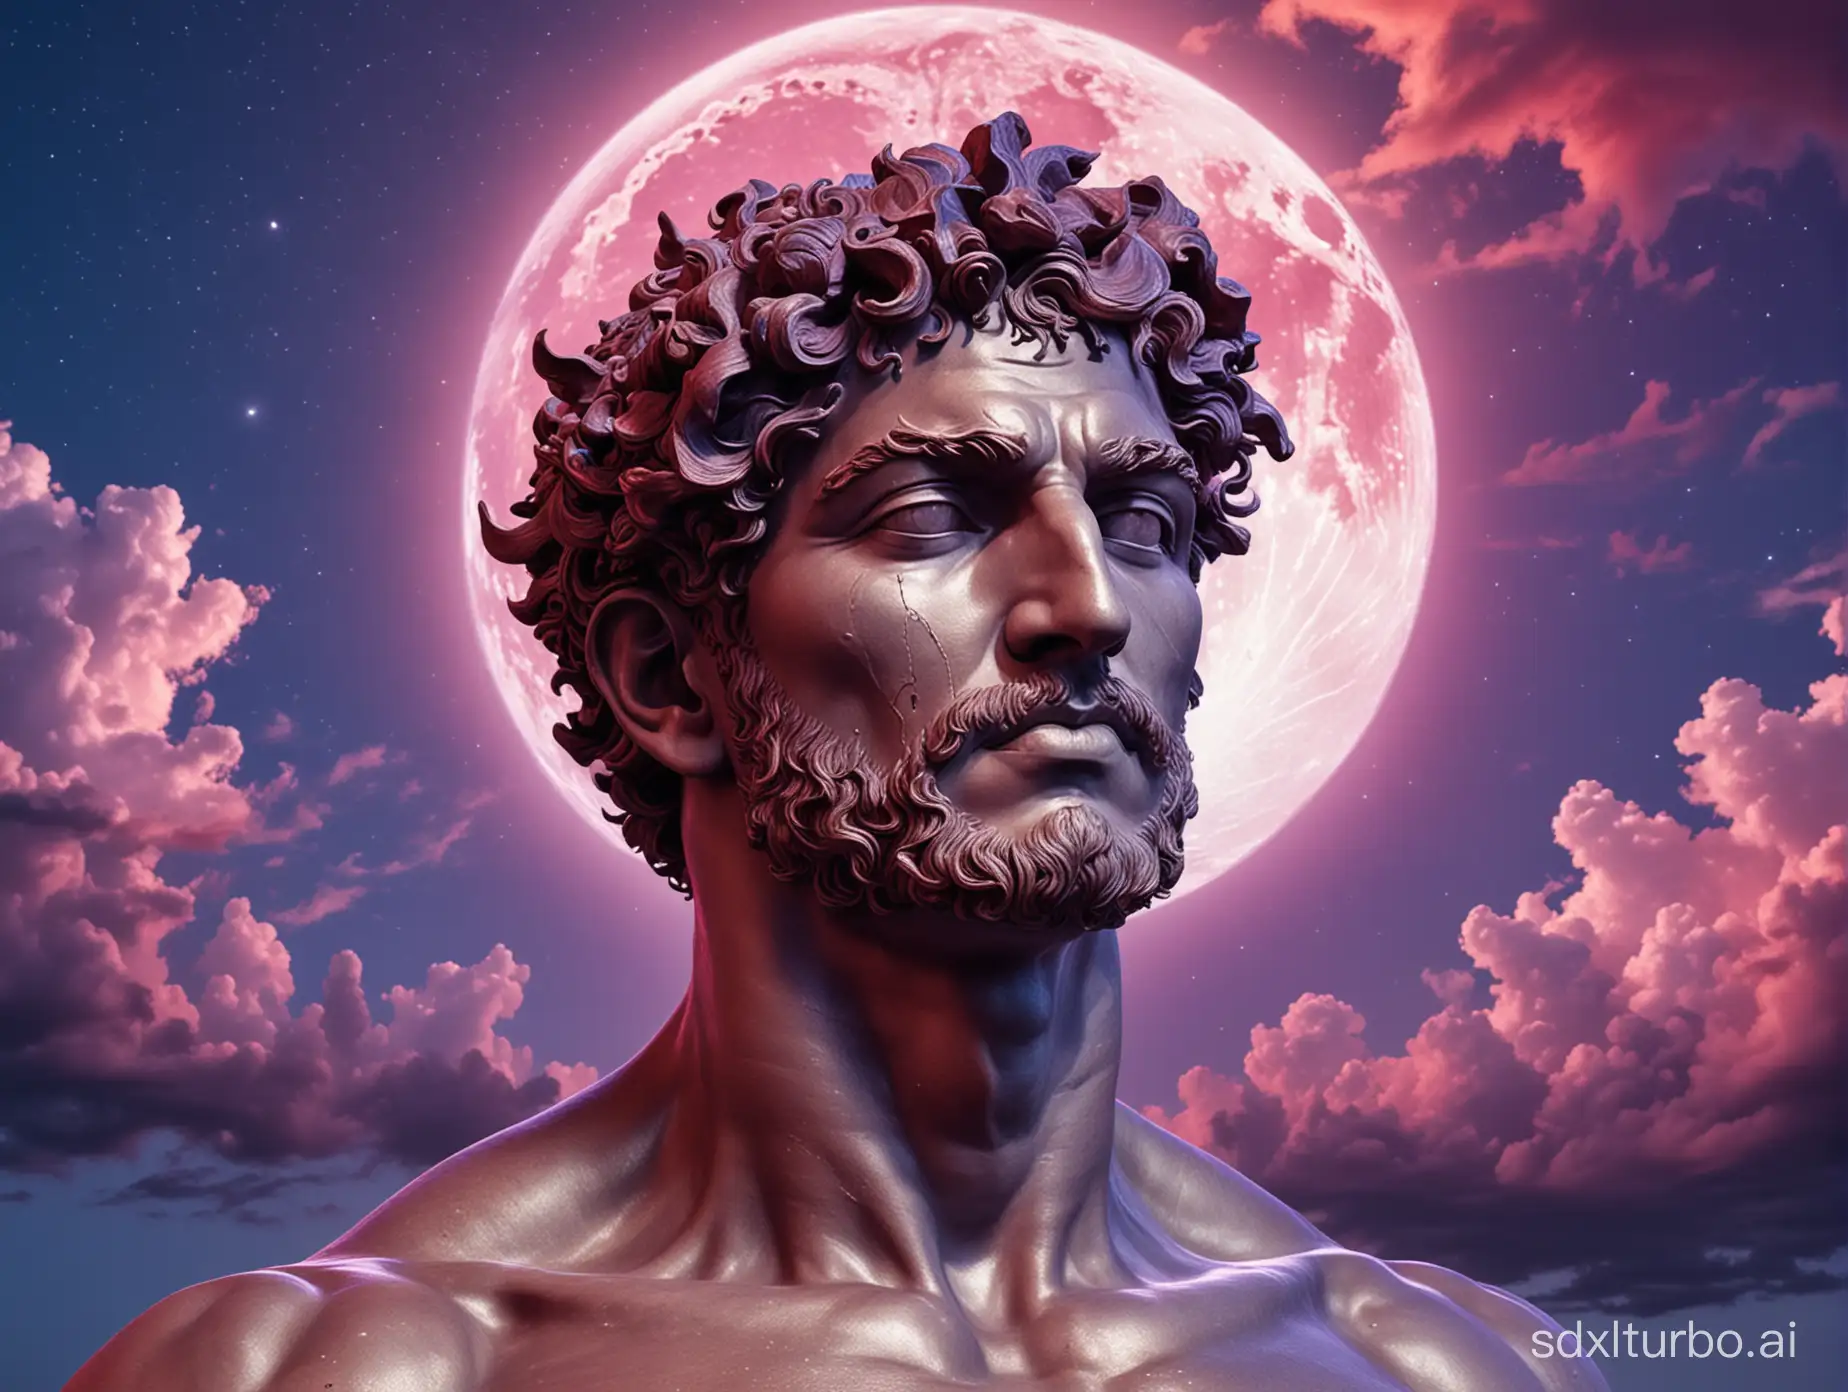 Landscape Greek god with metallic-type skin and big head and neck, big body, shining bright moon behind the face with the red purple and indigo vibrant sky with clouds behind it